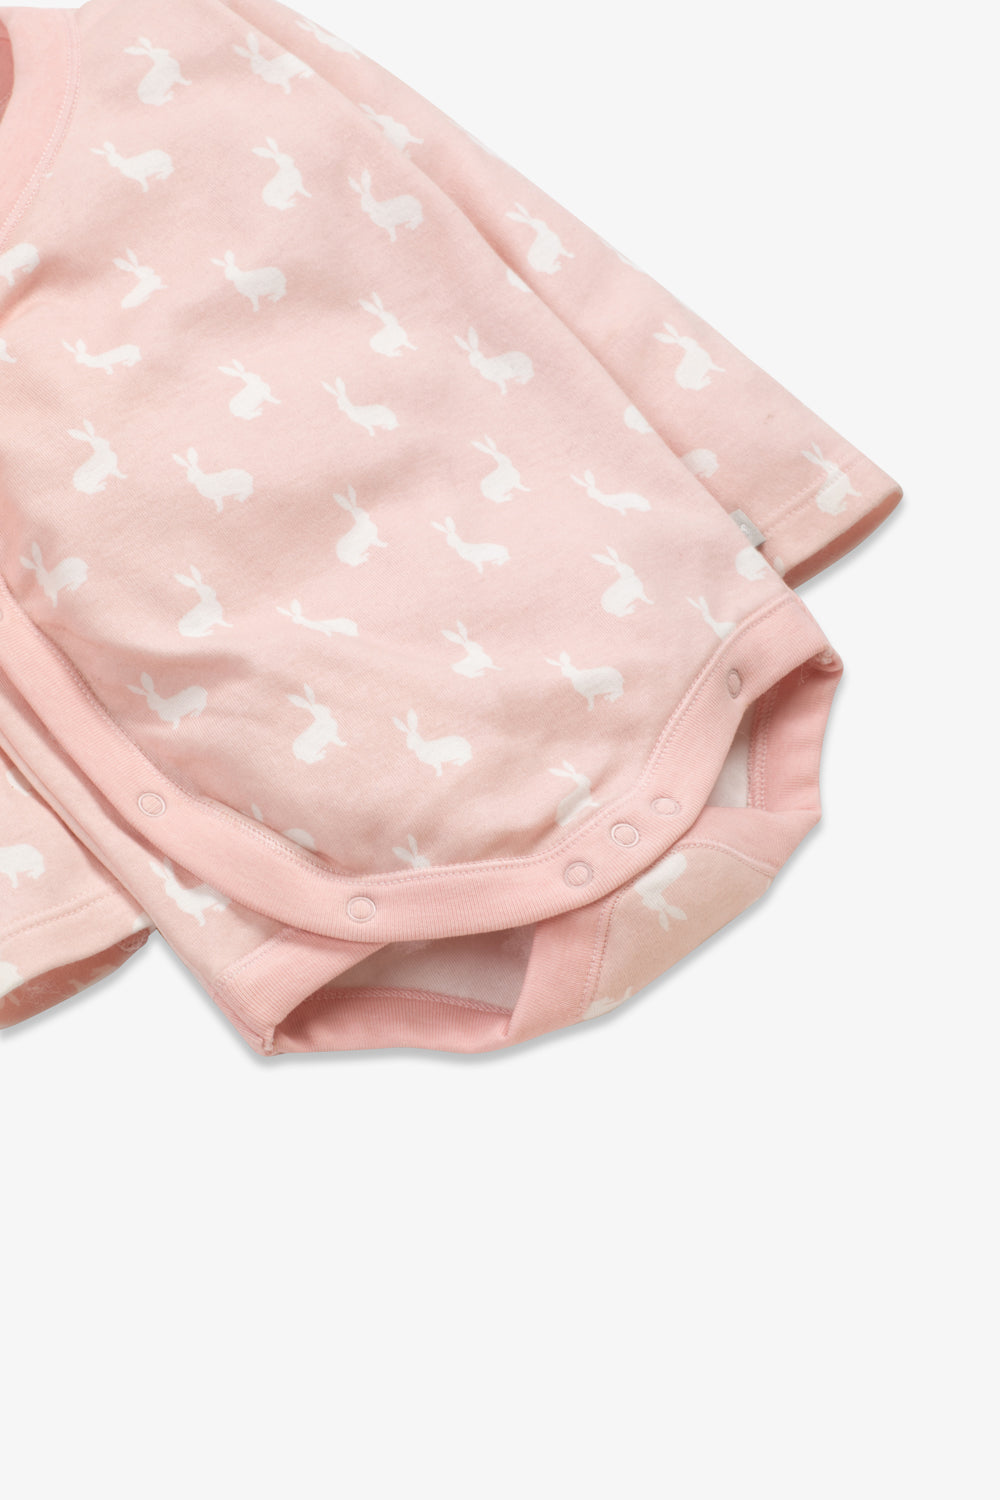 Jersey Wrap Body, rose pink hare print